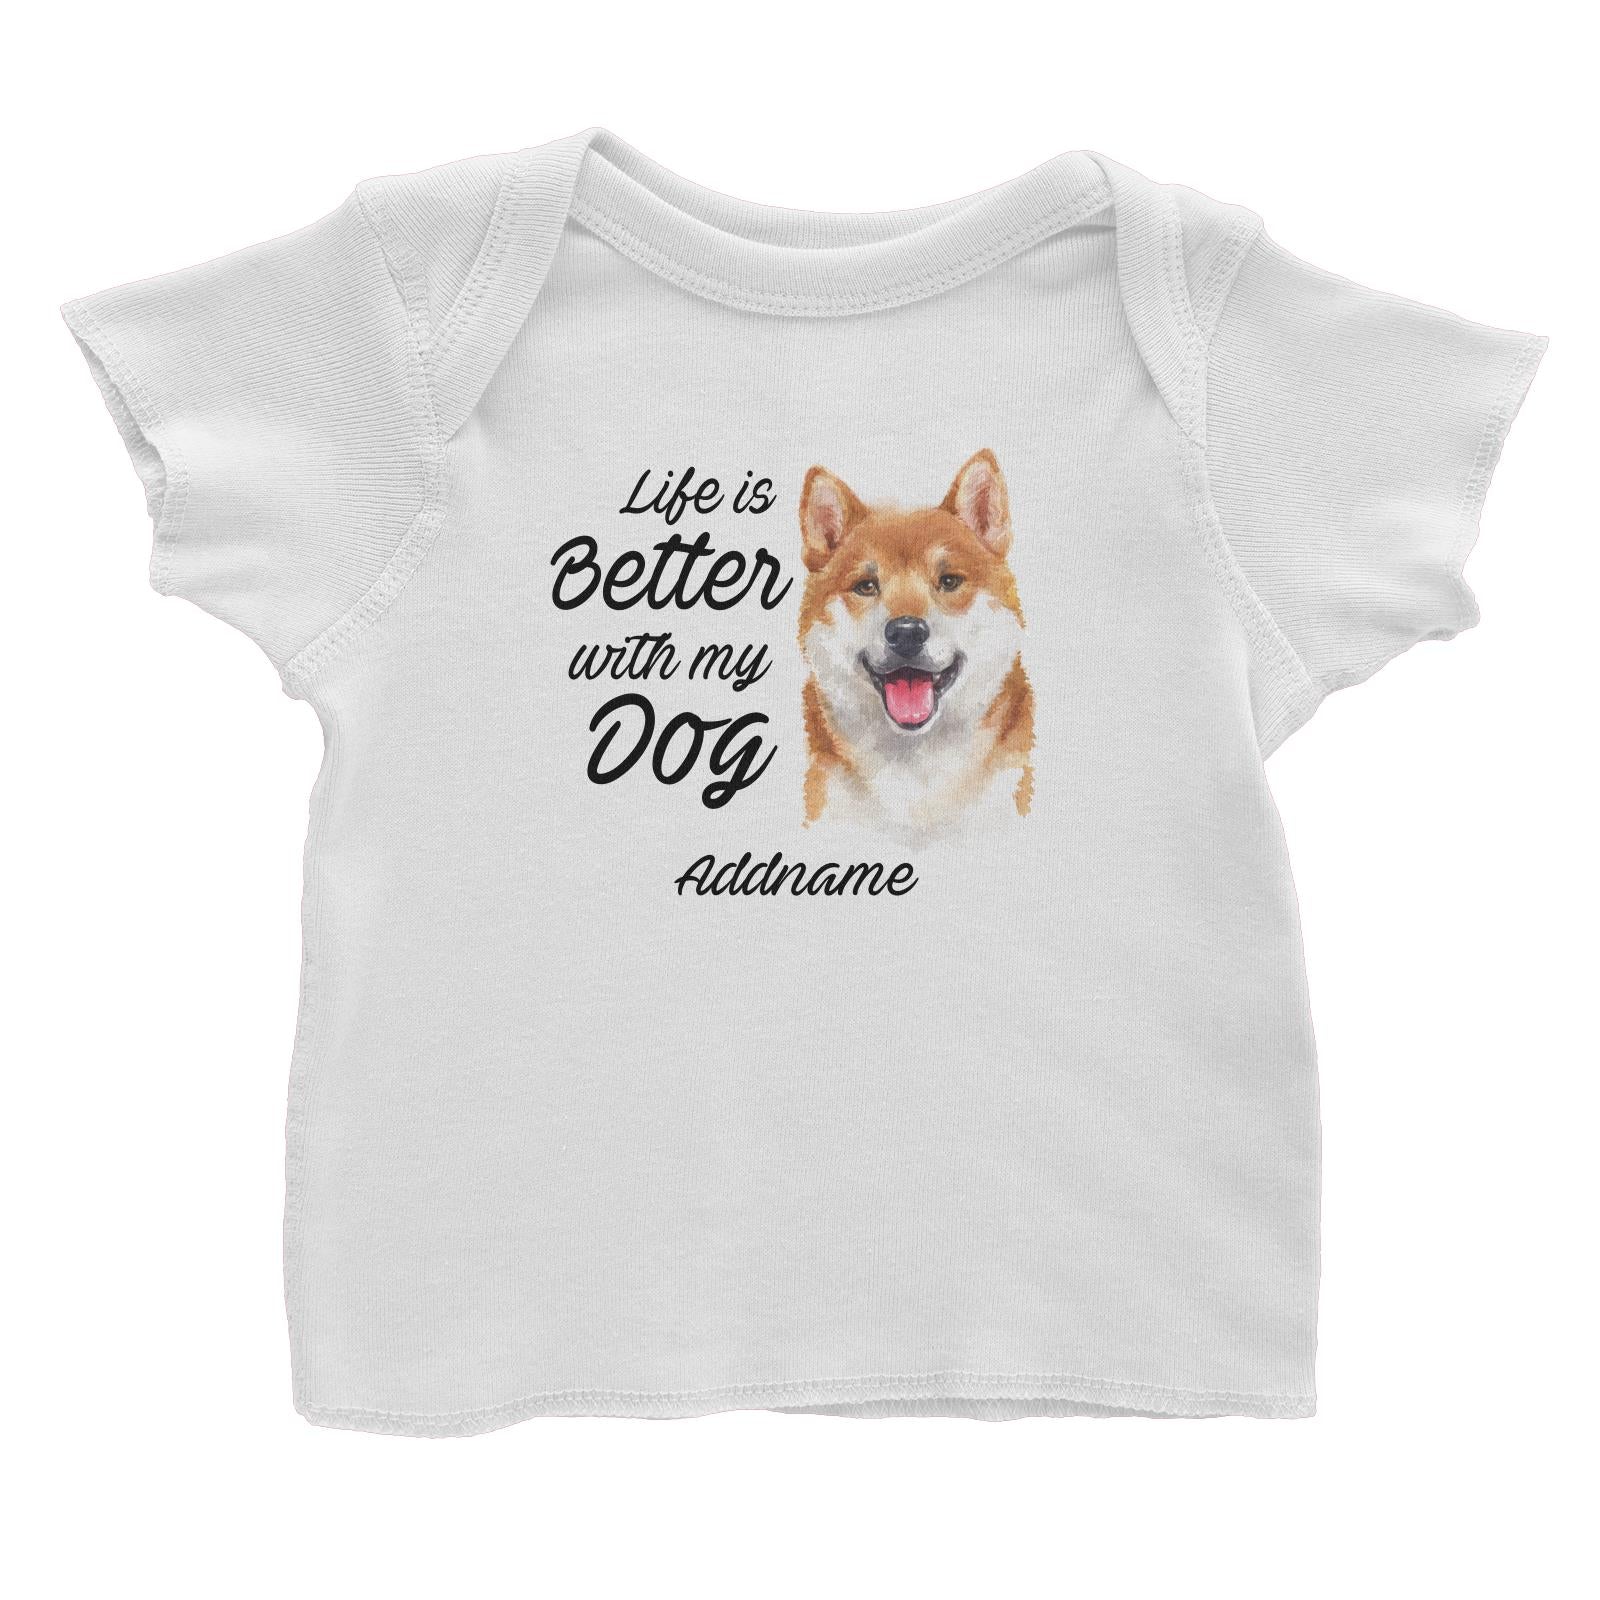 Watercolor Life is Better With My Dog Shiba Inu Addname Baby T-Shirt